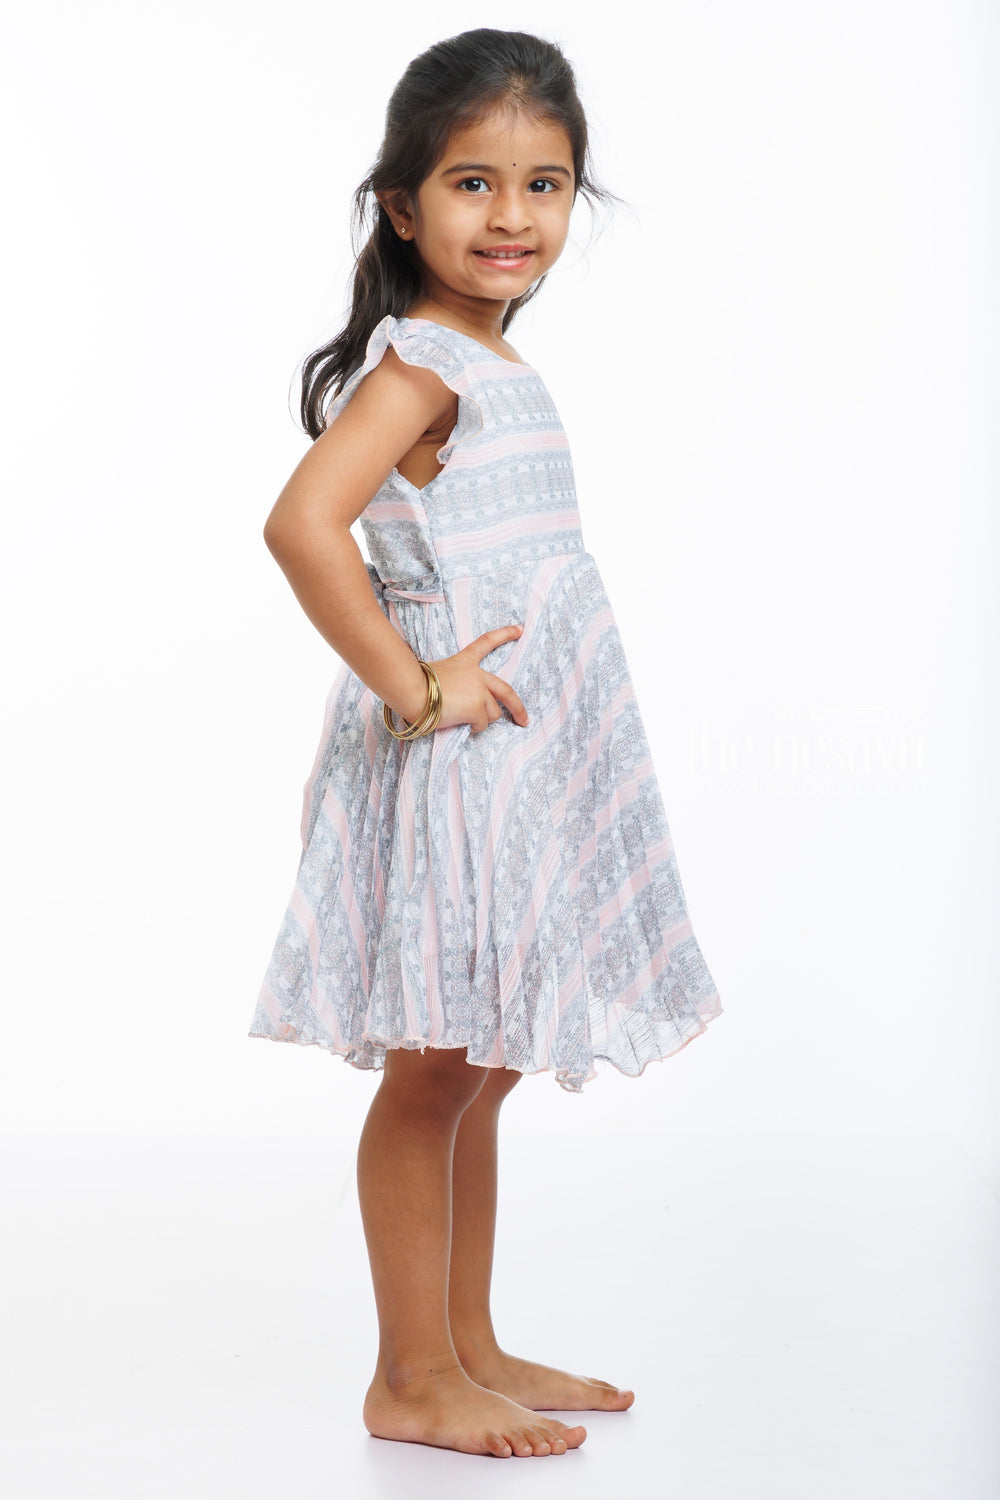 The Nesavu Baby Fancy Frock Baby Girls Whimsical Floral Stripe Summer Dress - Ethereal Comfort Nesavu Girls Pink and Grey Floral Stripe Dress | Perfect for Playdates and Parties | The Nesavu